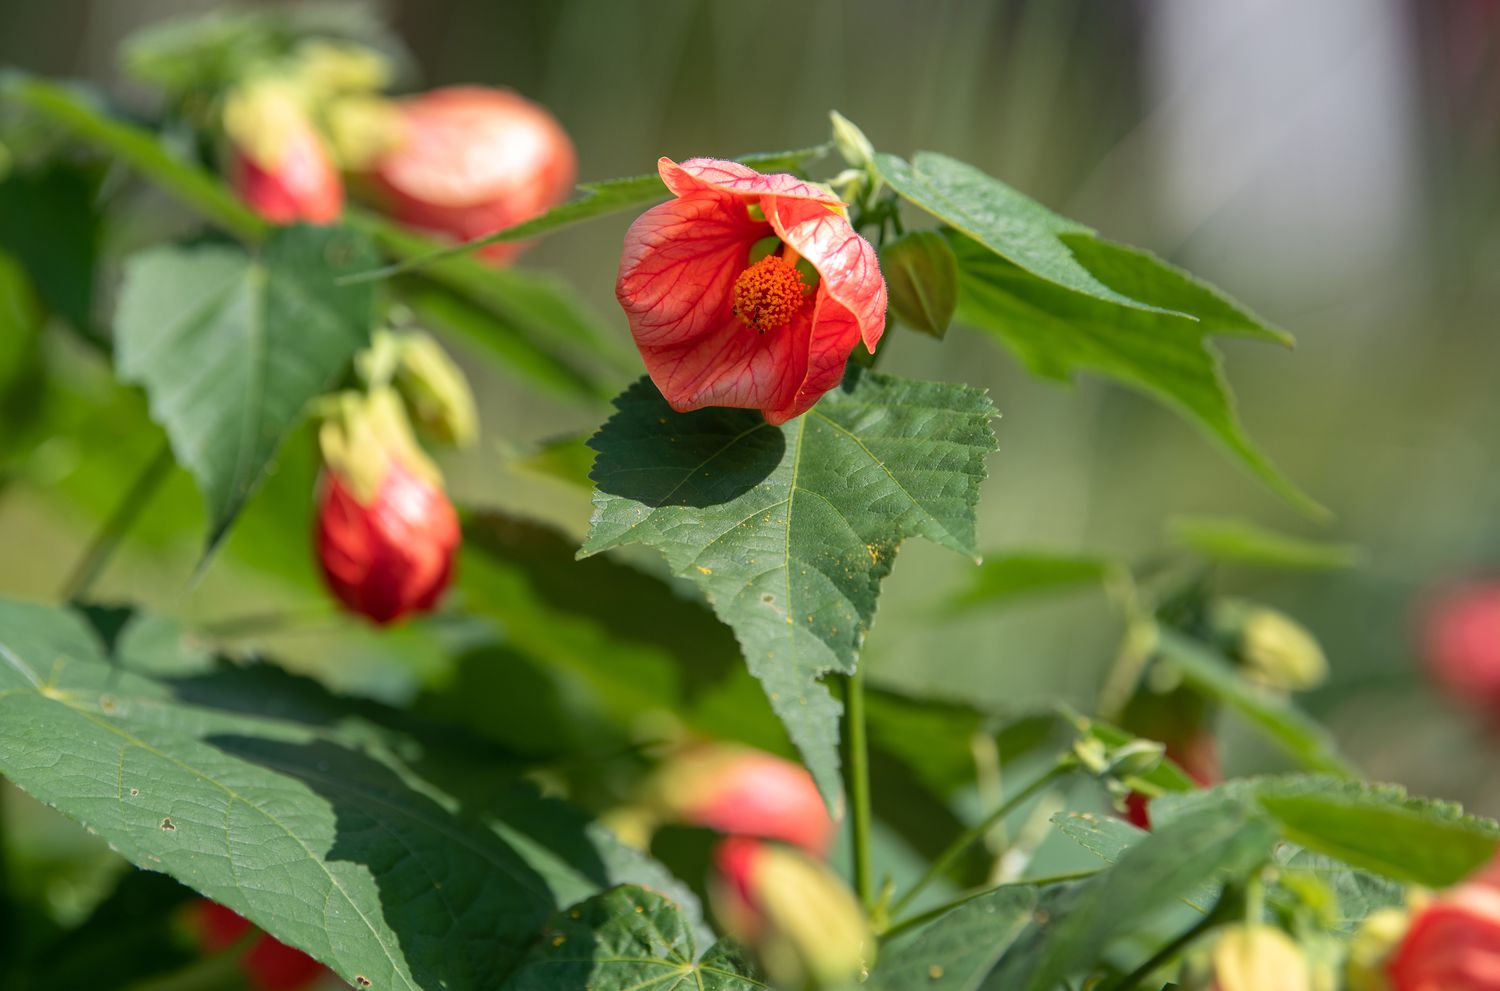 Abutilon plant with pink cup-shaped flowers surrounded by leaves closeup